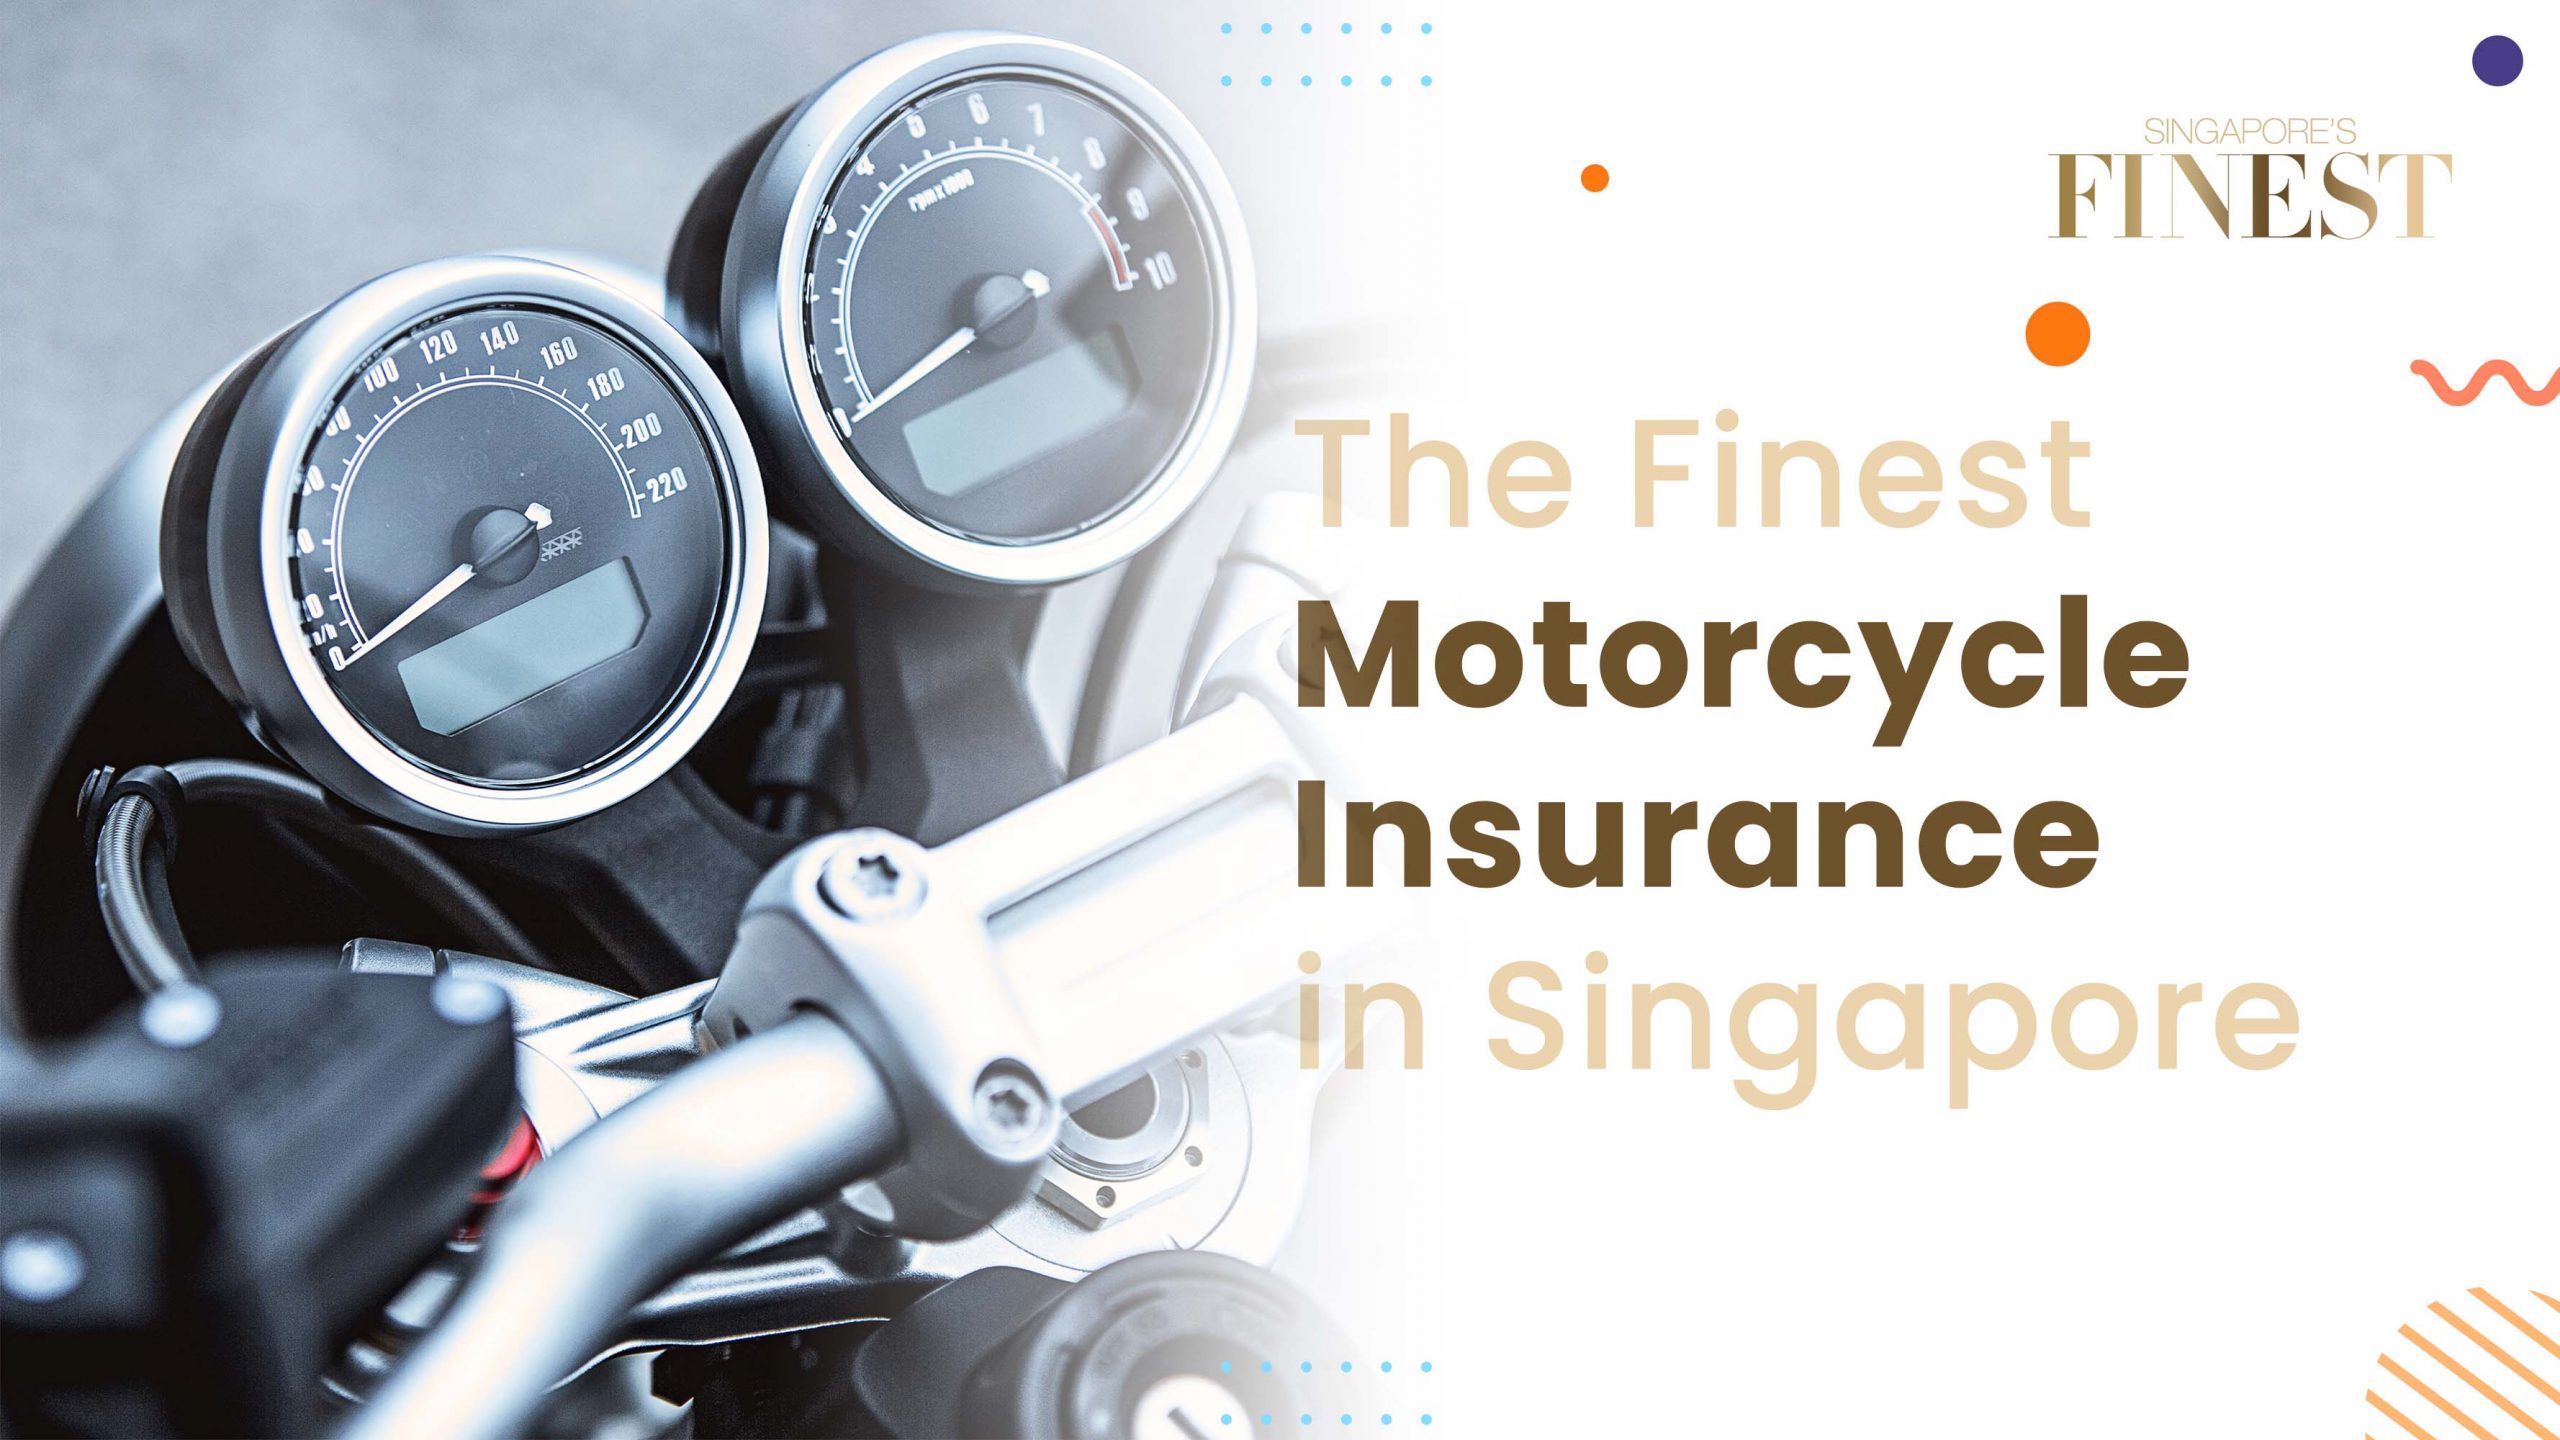 Finest Motorcycle Insurance in Singapore